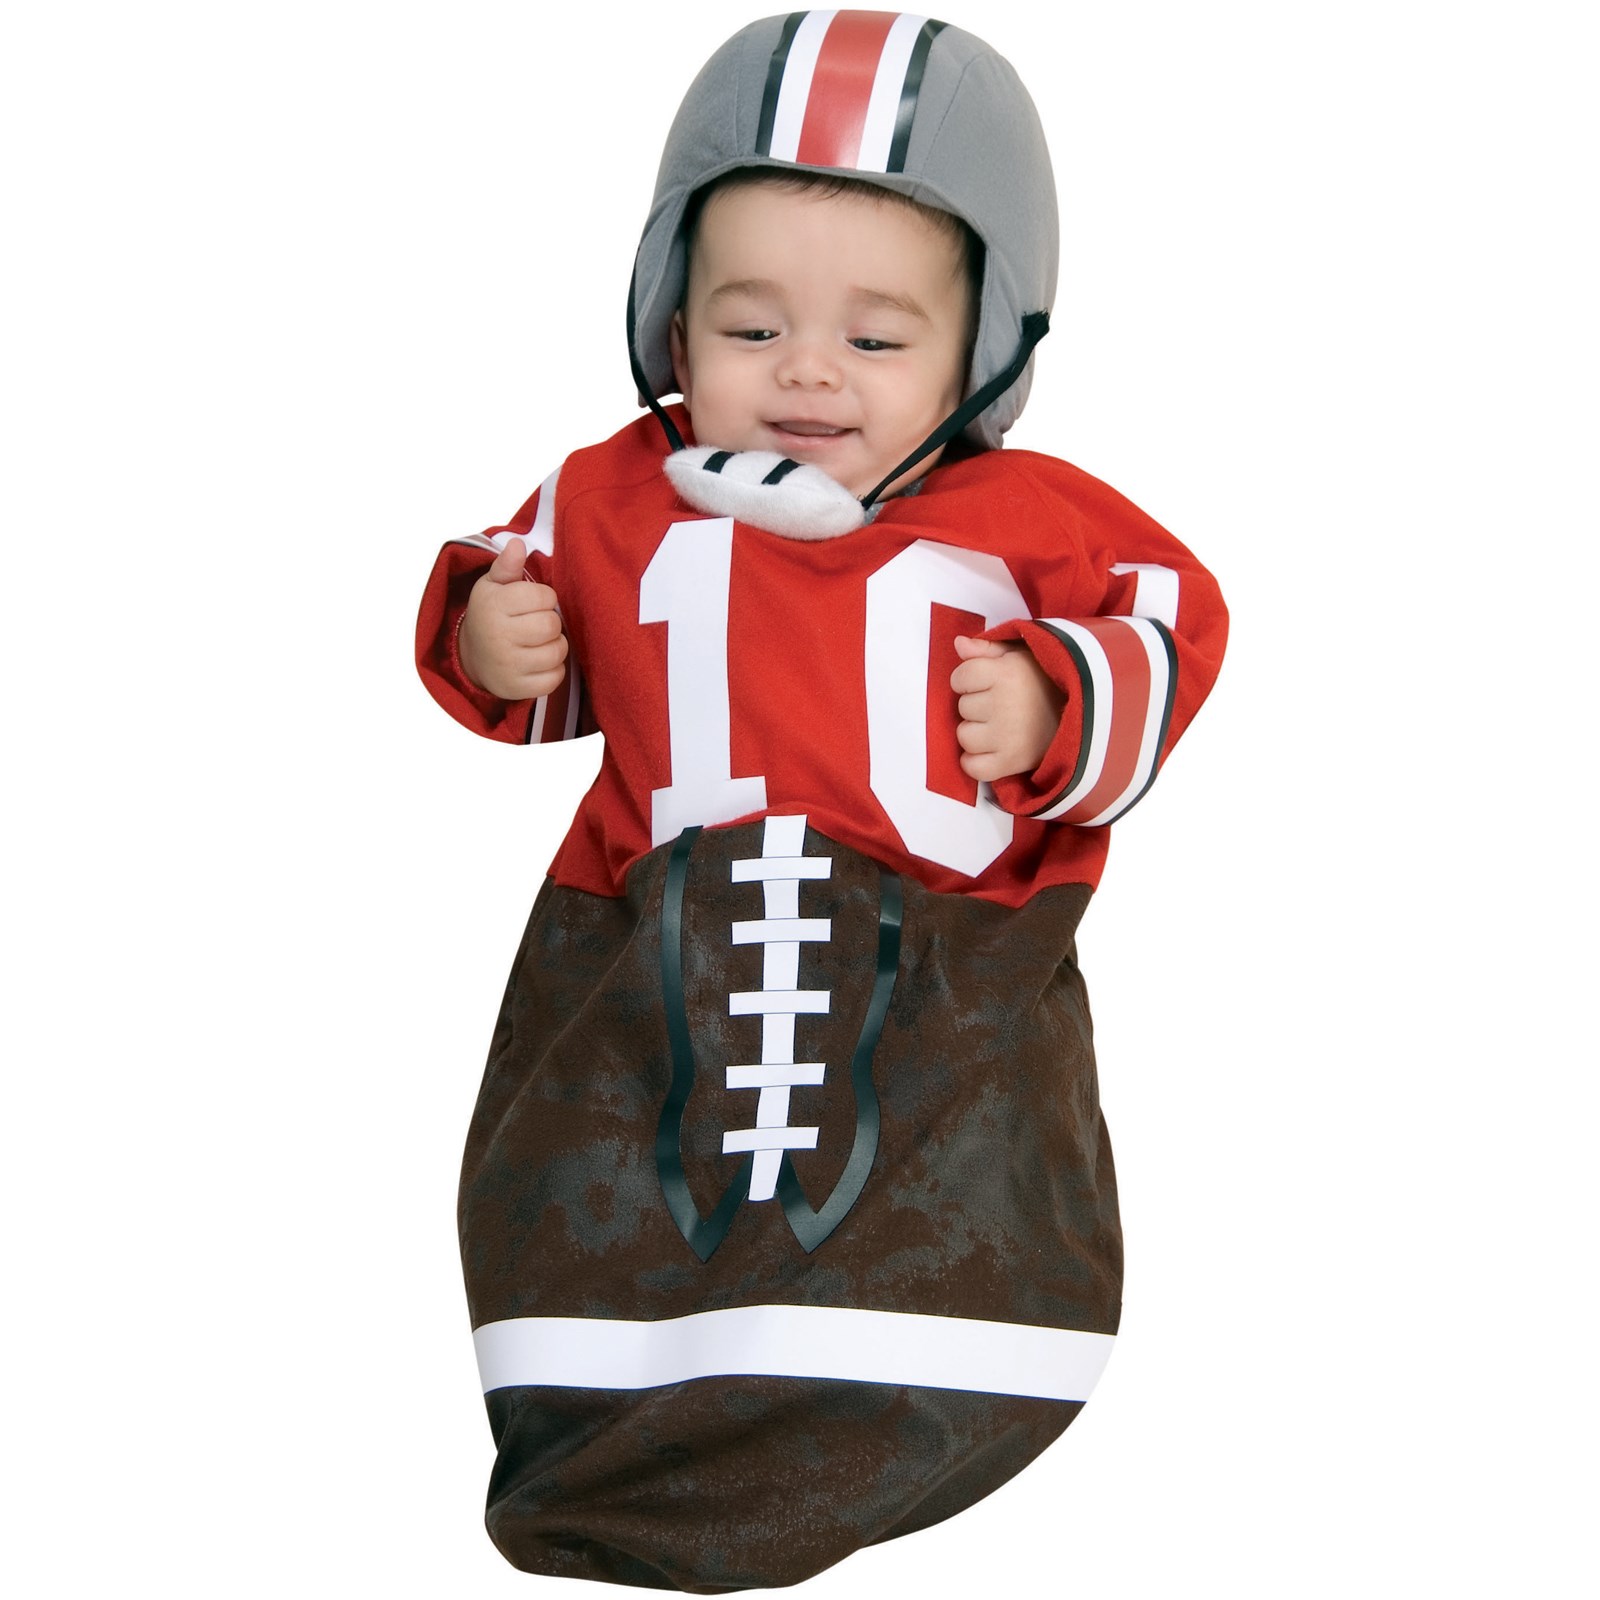 Football Red Deluxe Bunting Infant Costume